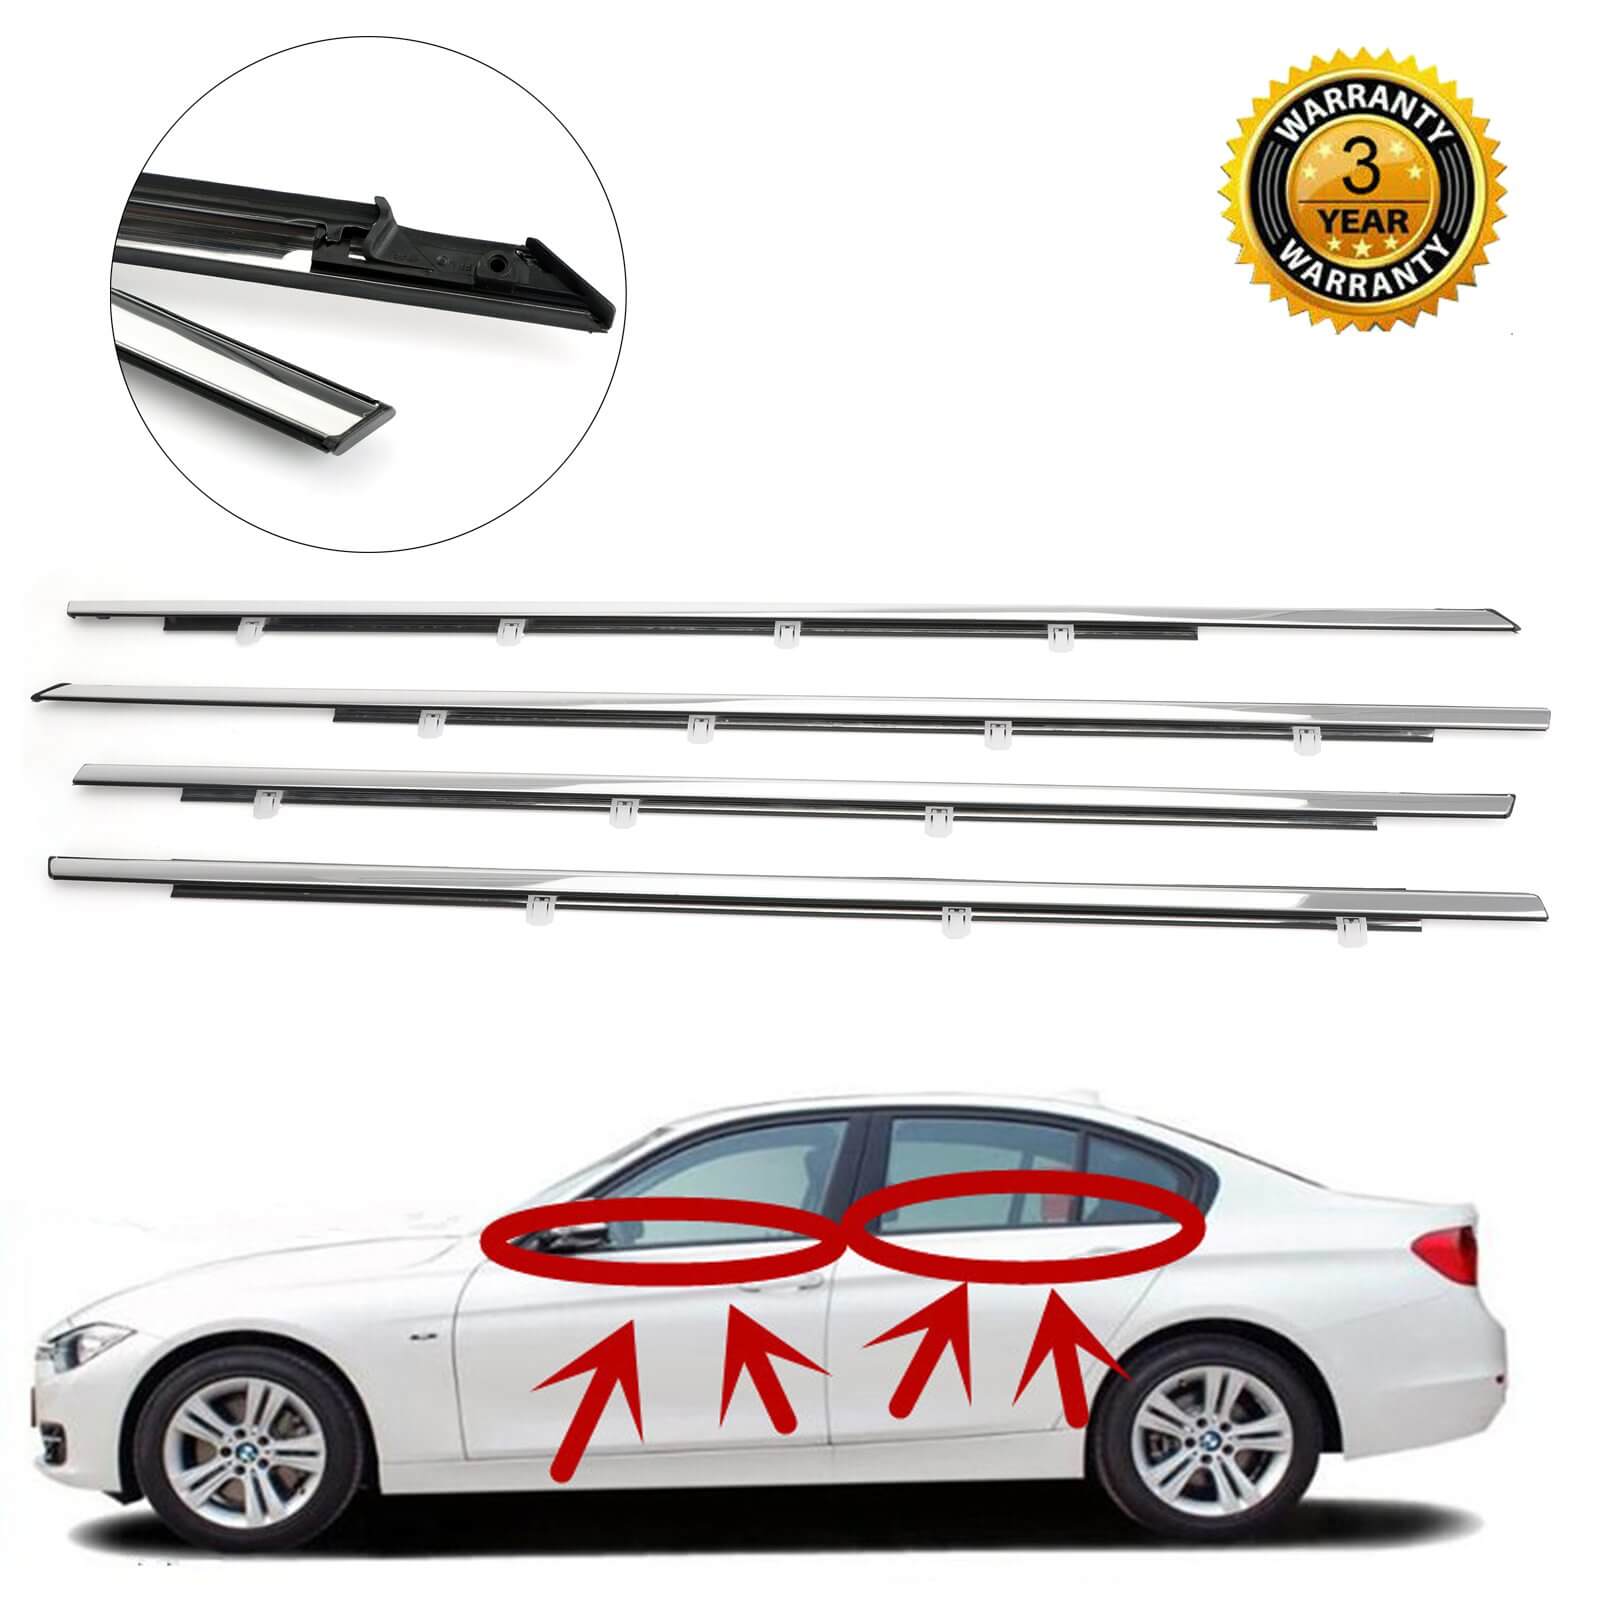 4×Chrome Weatherstrip Window Moulding Trim Seal Belt for Accord 2008-2012 